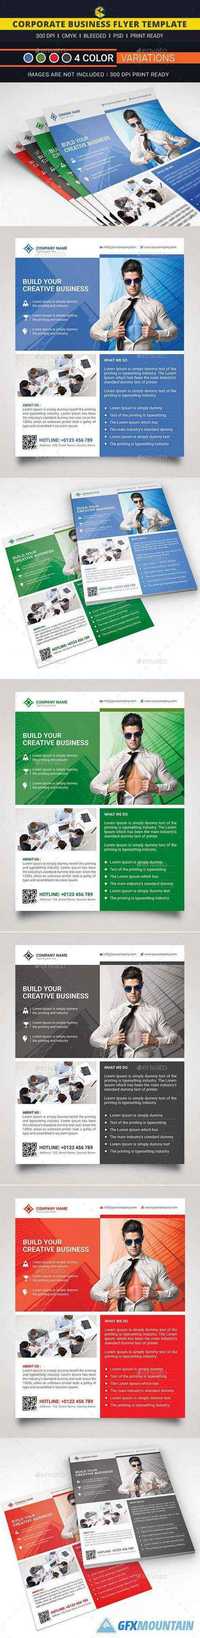 GraphicRiver - Corporate Business Flyer 12373643